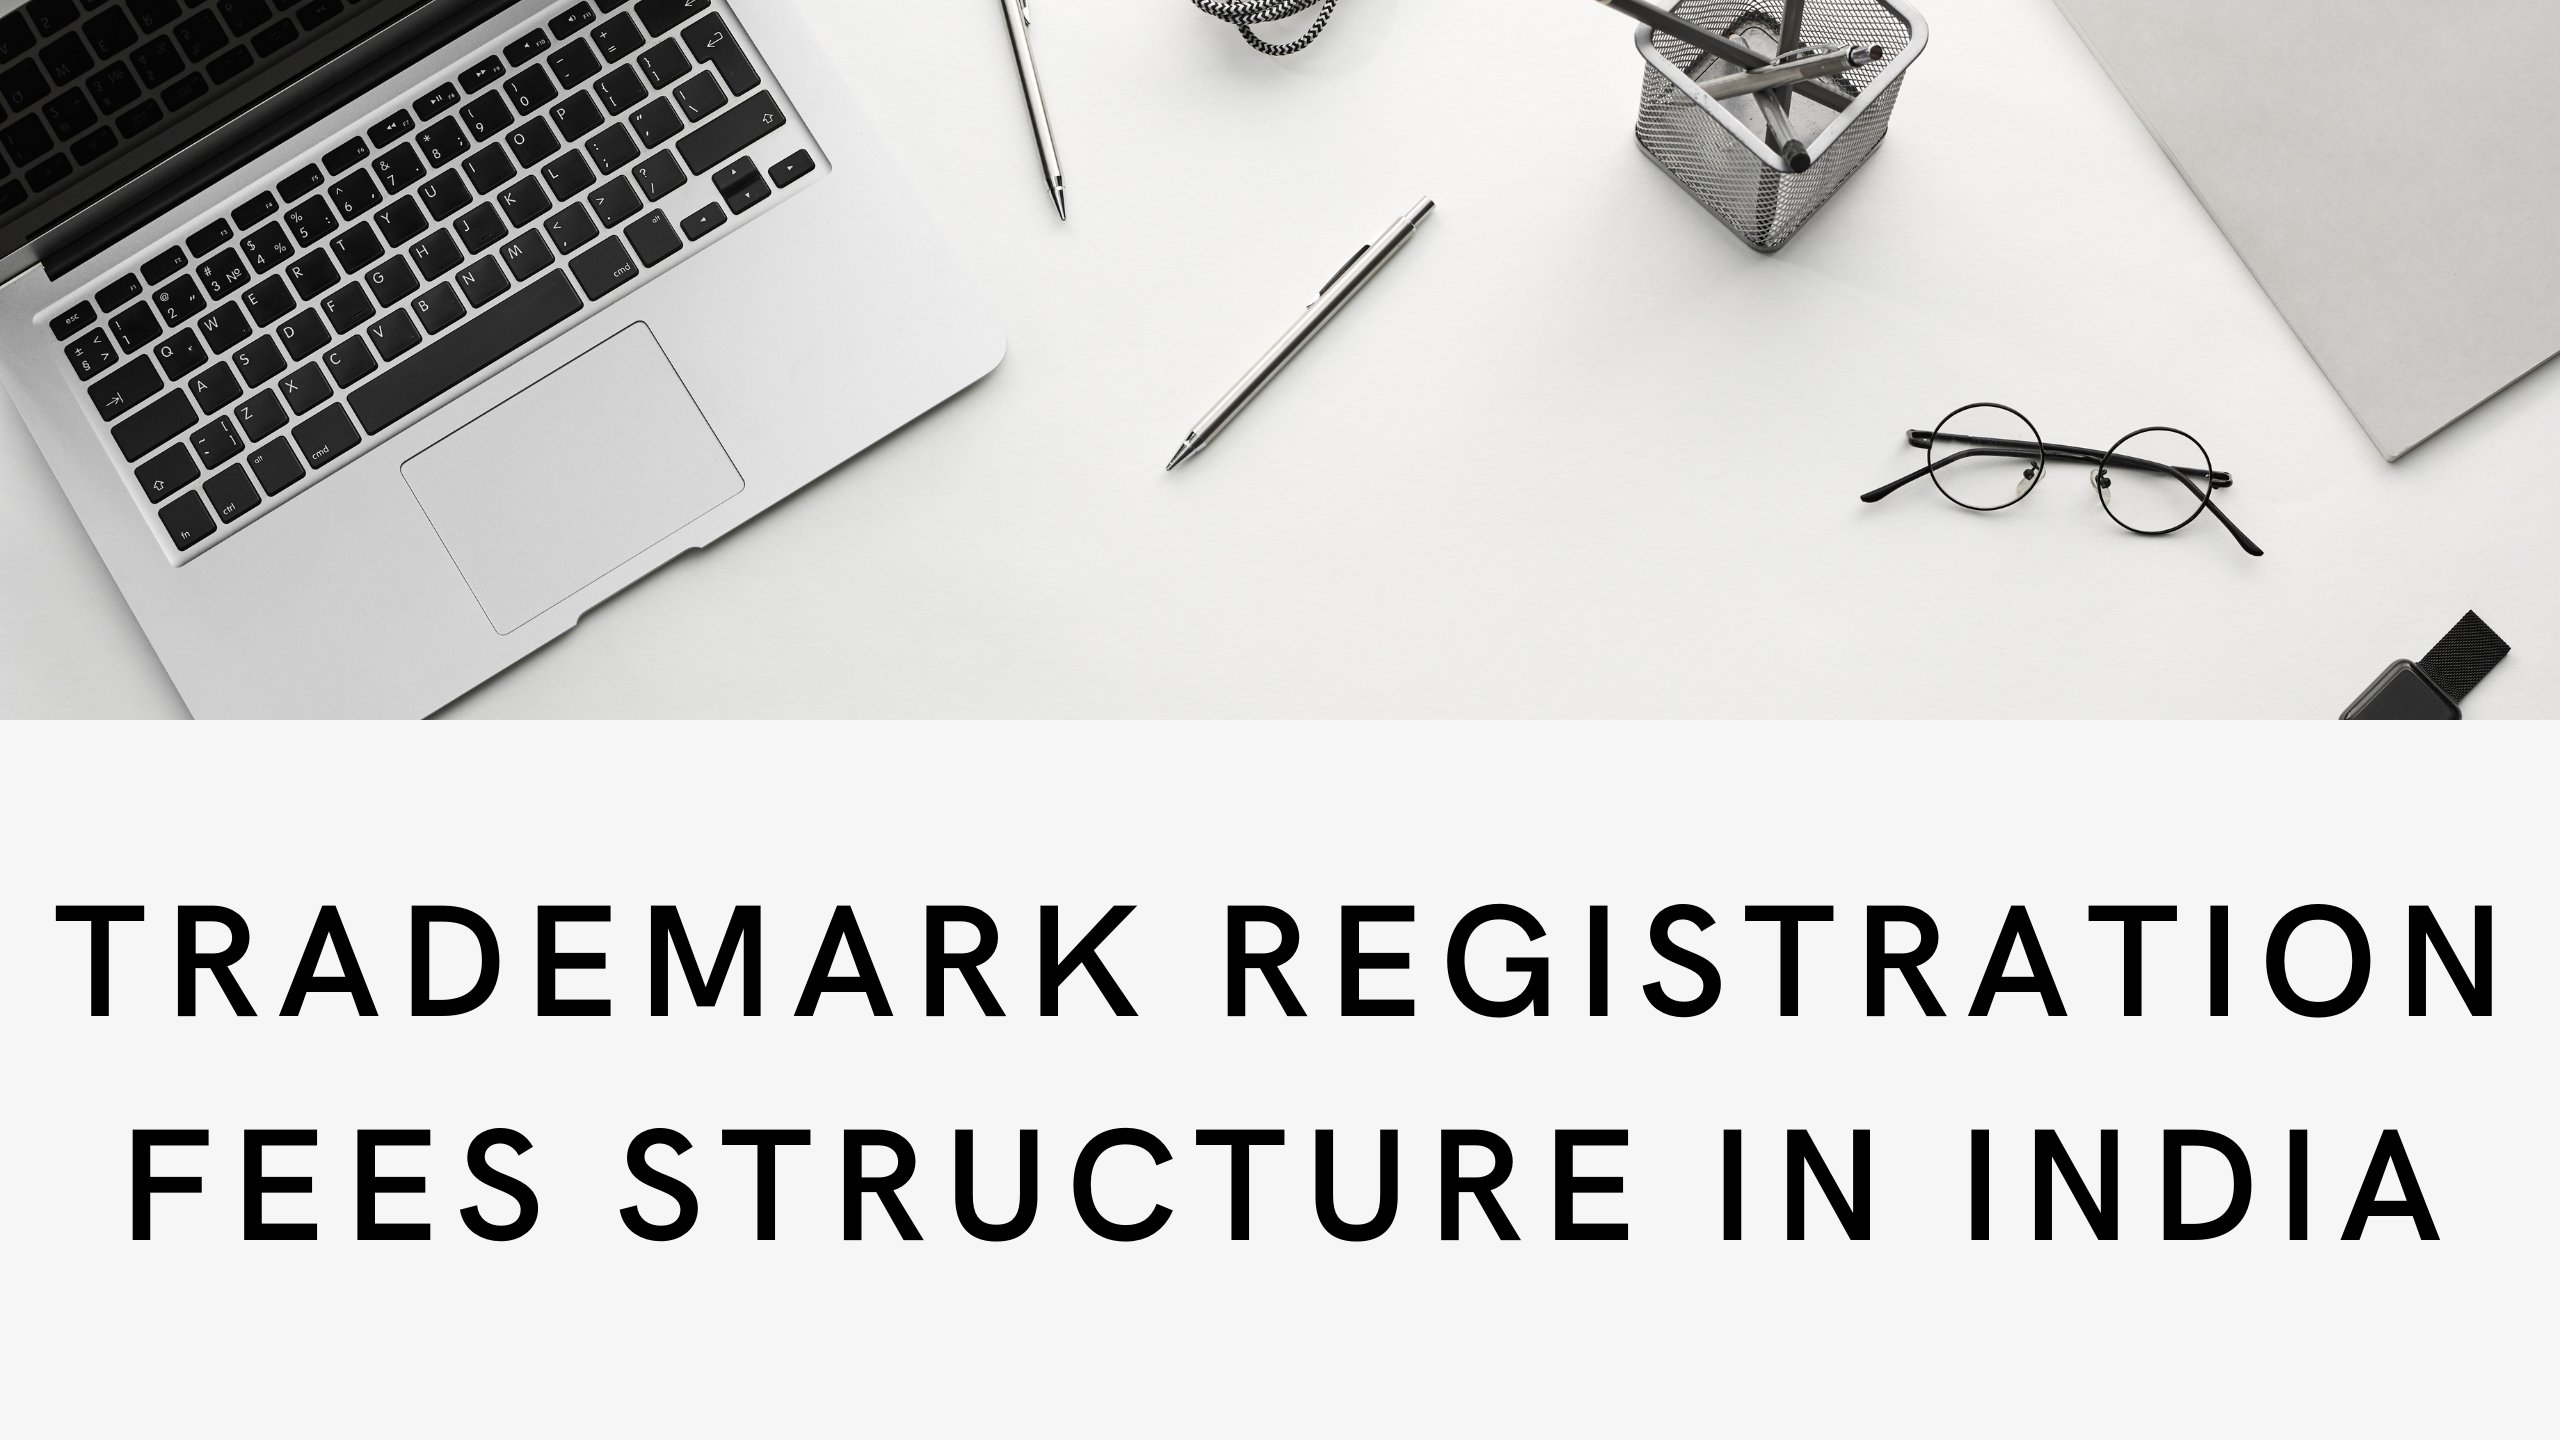 Trademark registration fees Structure in India.